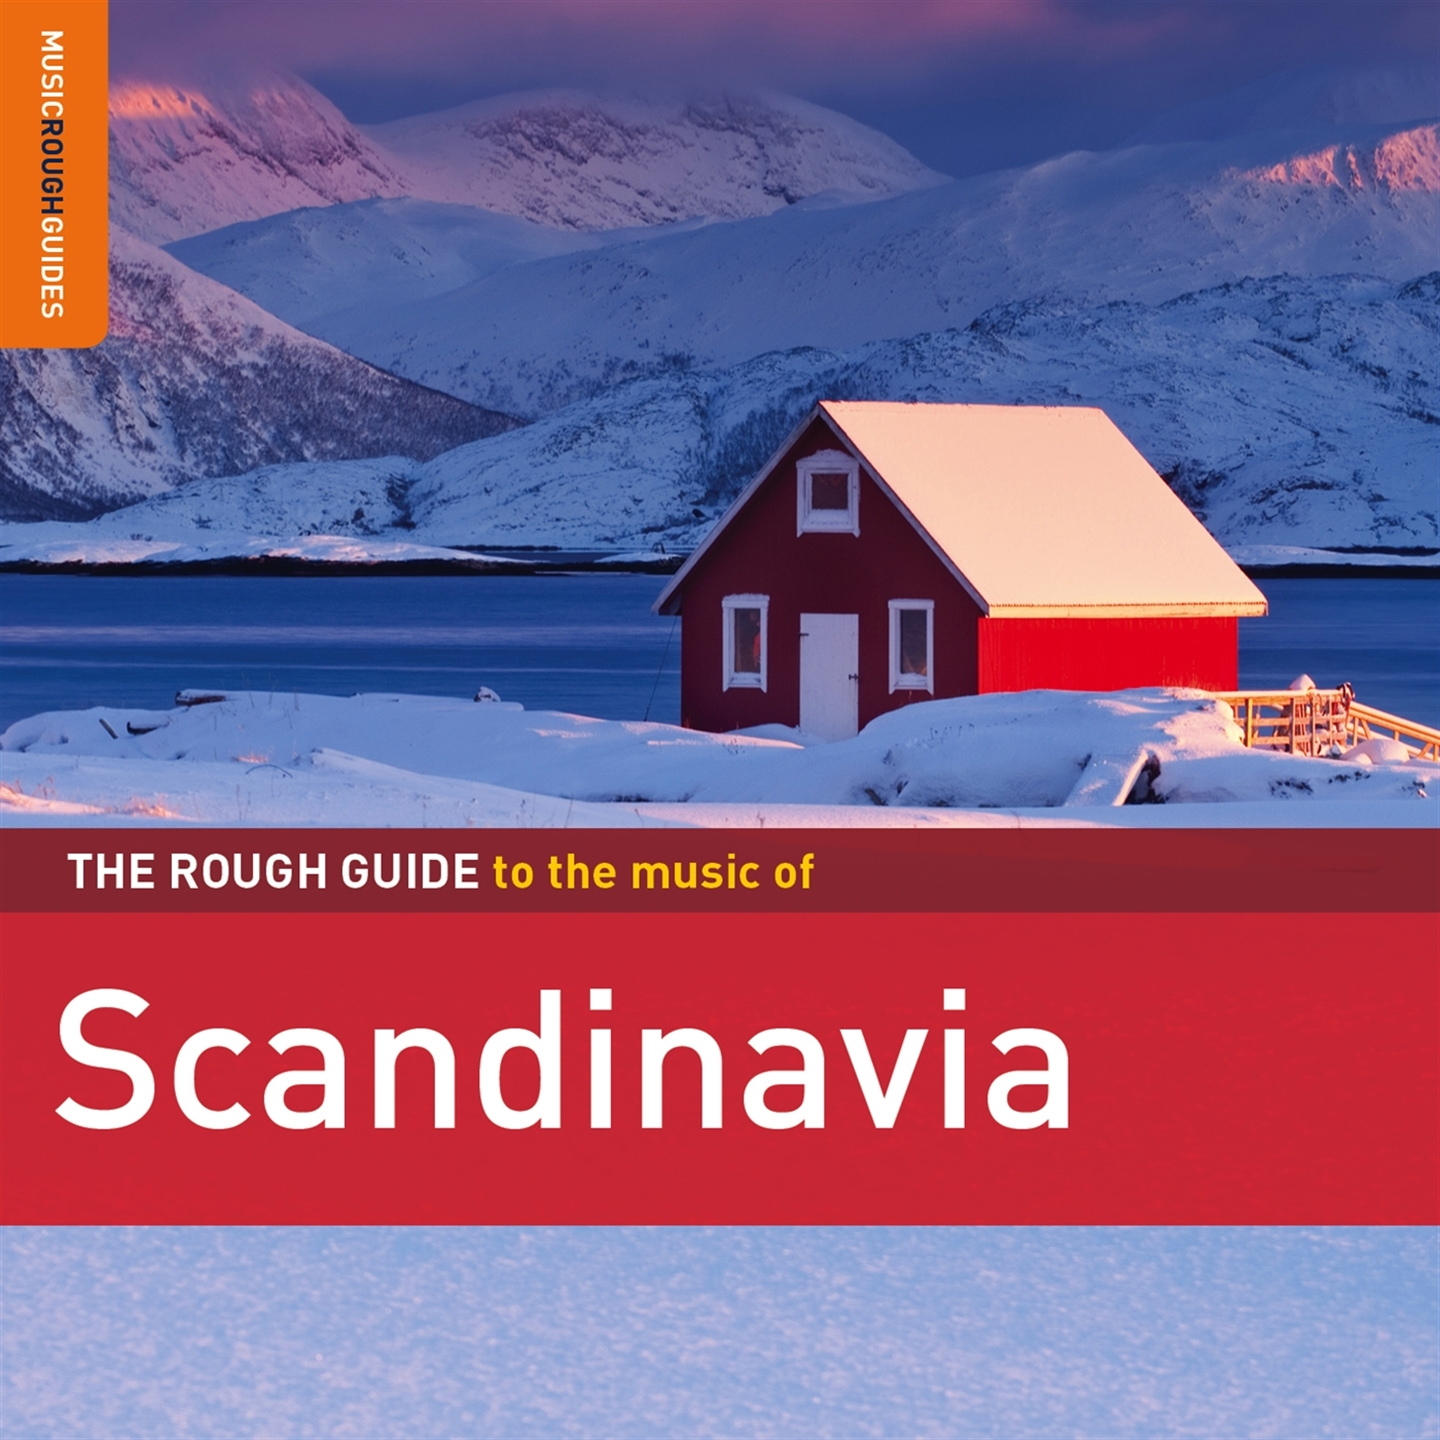 THE ROUGH GUIDE TO THE MUSIC OF SCANDINAVIA